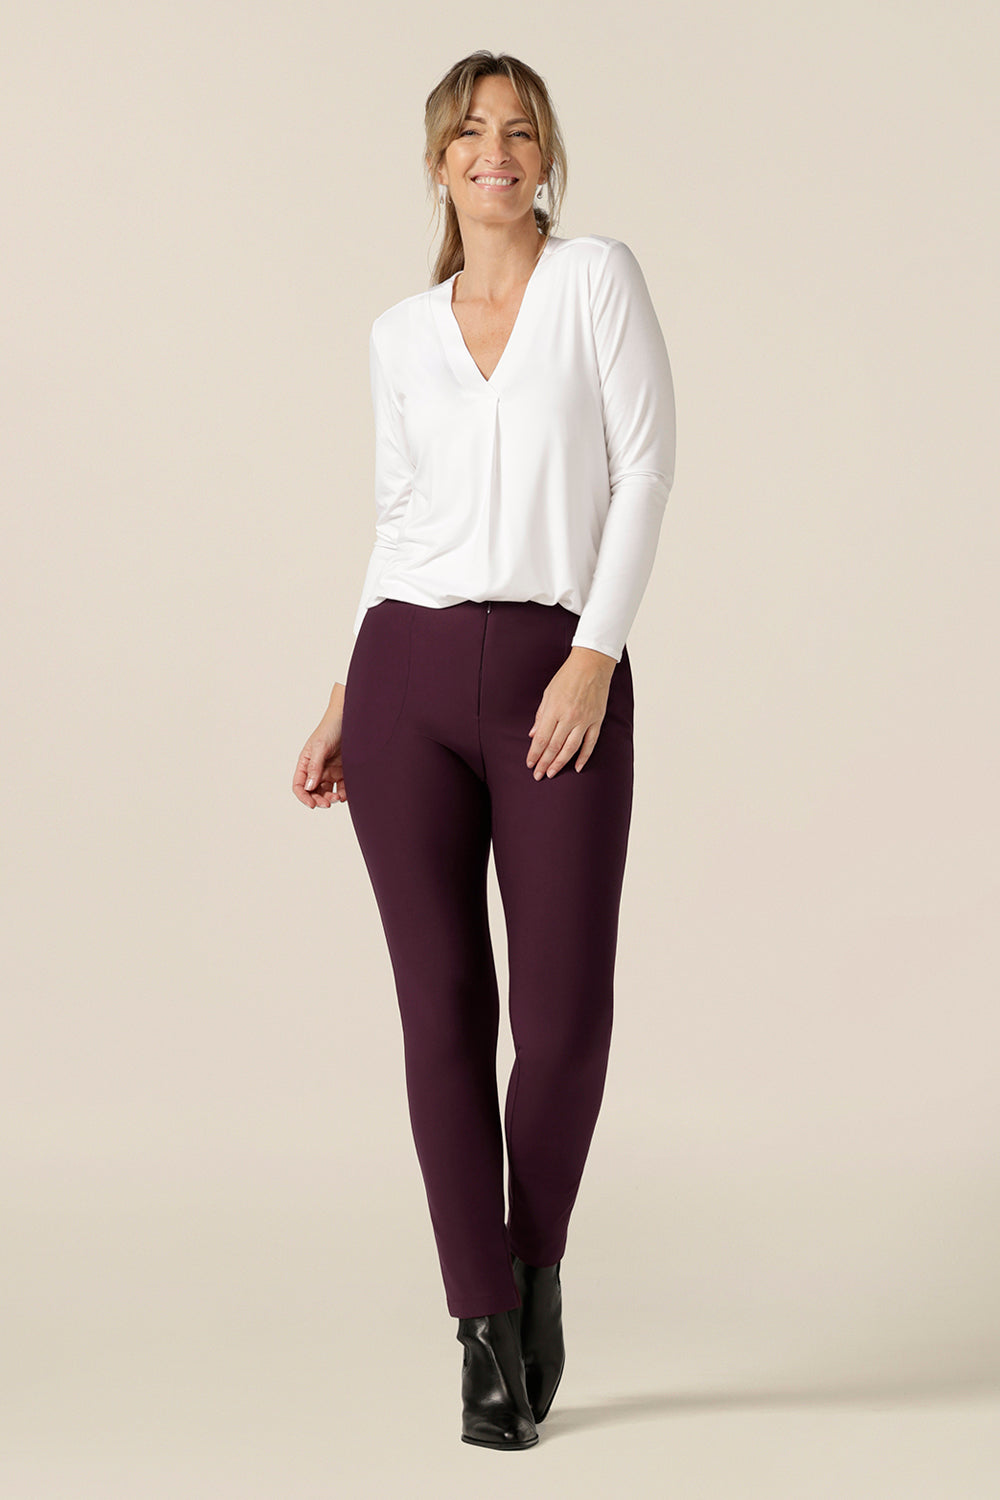 A great top for work or casual wear, this long sleeve, V-neck top in white bamboo jersey is a wardrobe essential that will match with your capsule wardrobes. worn with slim leg pants in Mulberry, this white workwear top is made in Australia by Australian and New Zealand women's clothing brand, L&F.